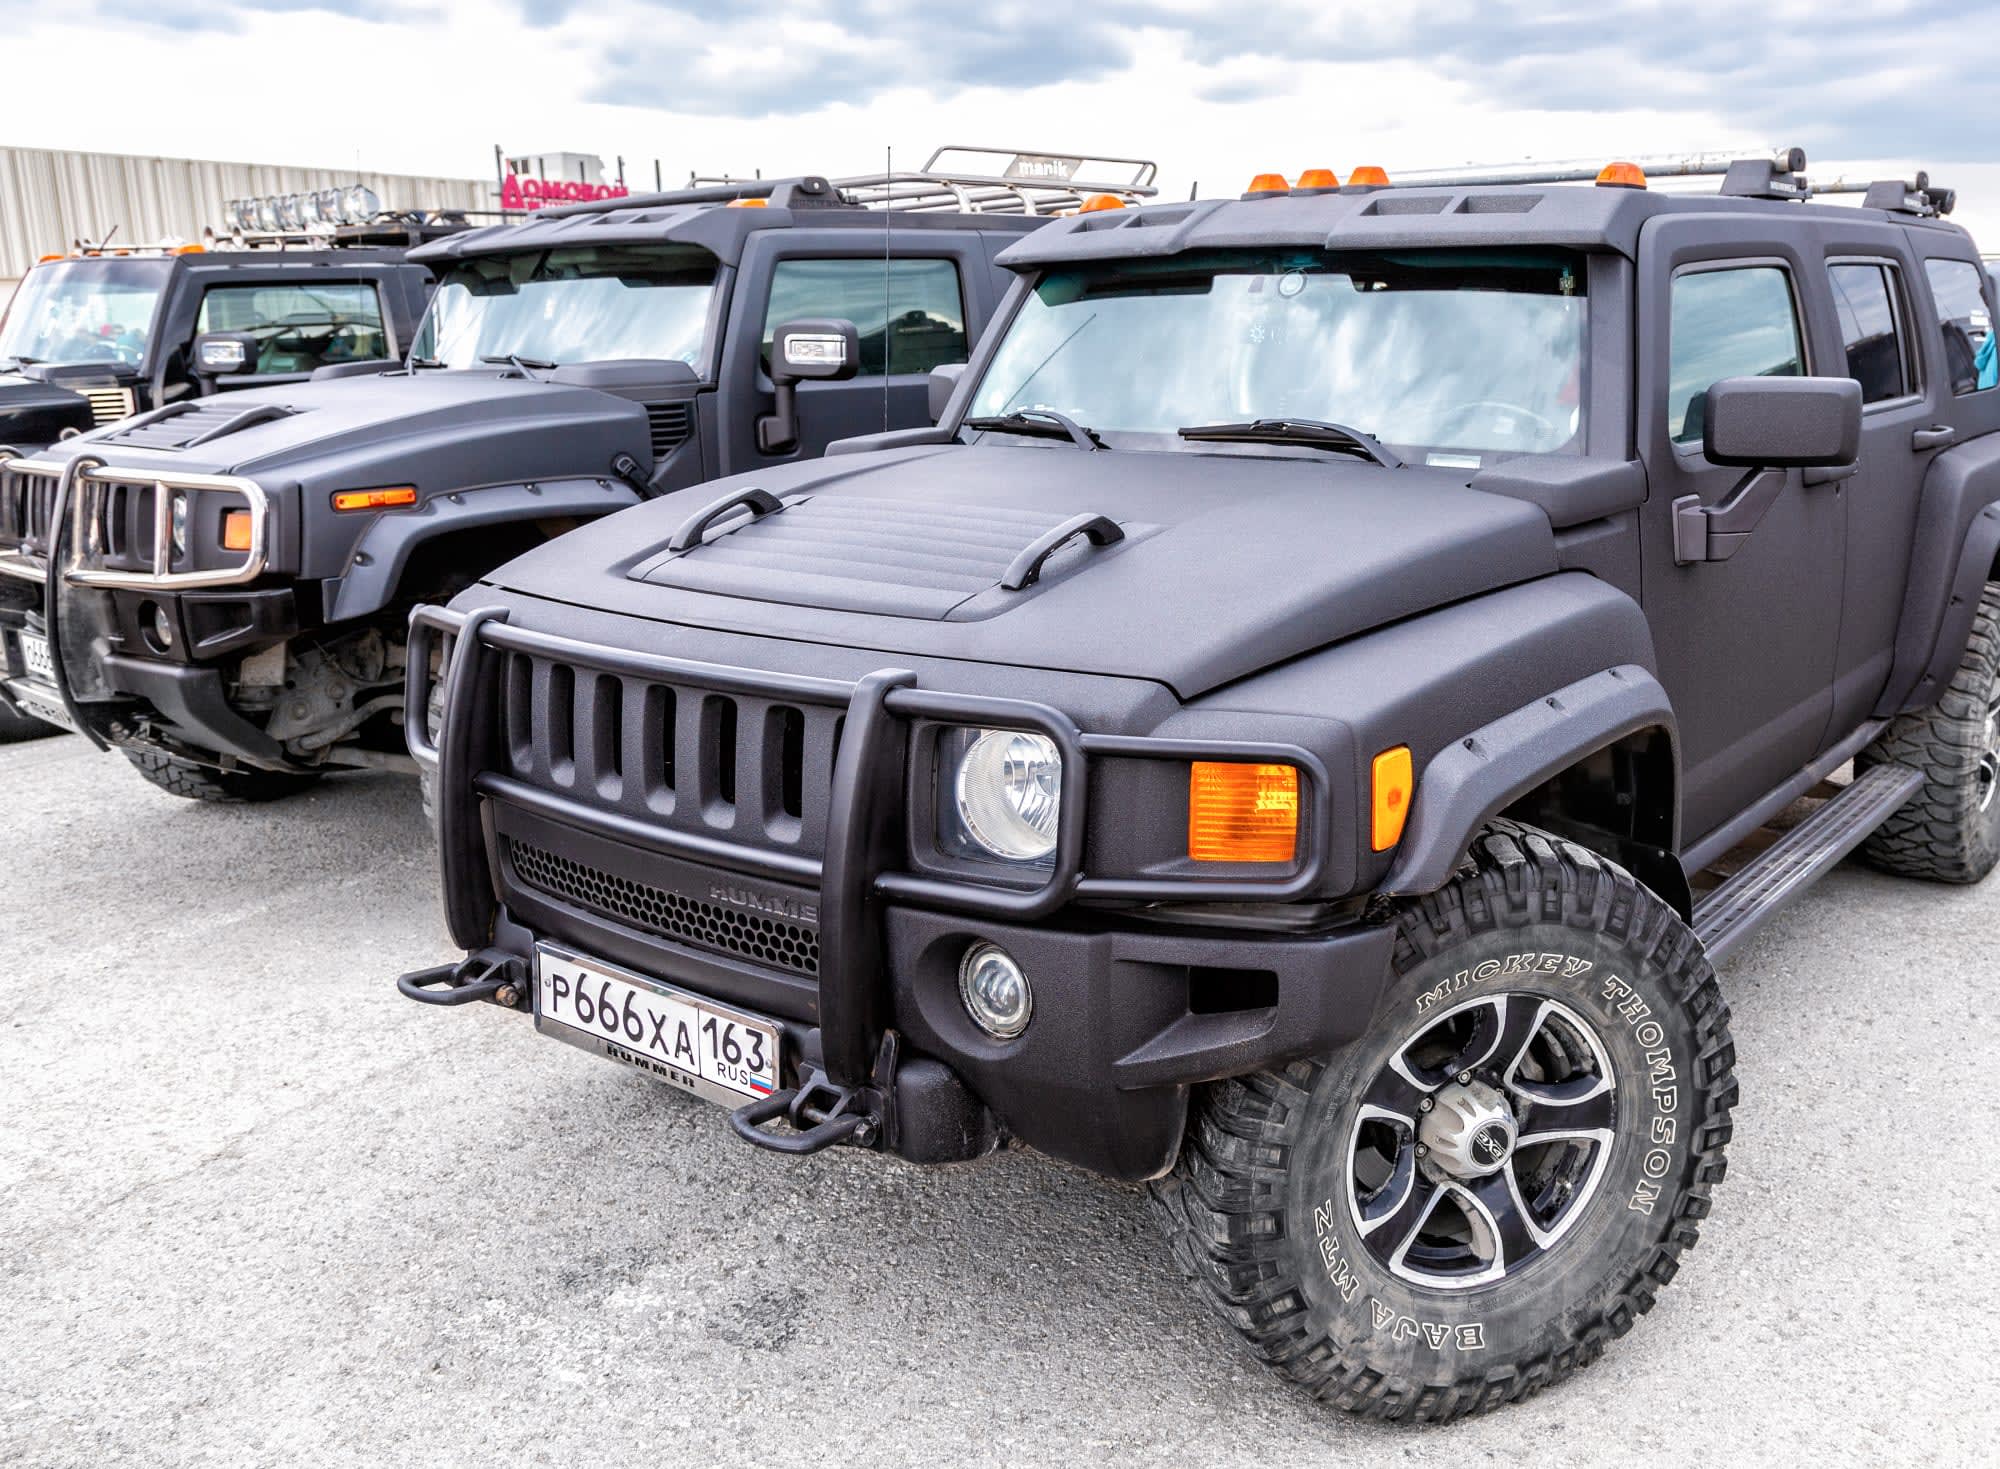 GM reportedly plans to bring back the Hummer as an electric pickup | Engadget2000 x 1468